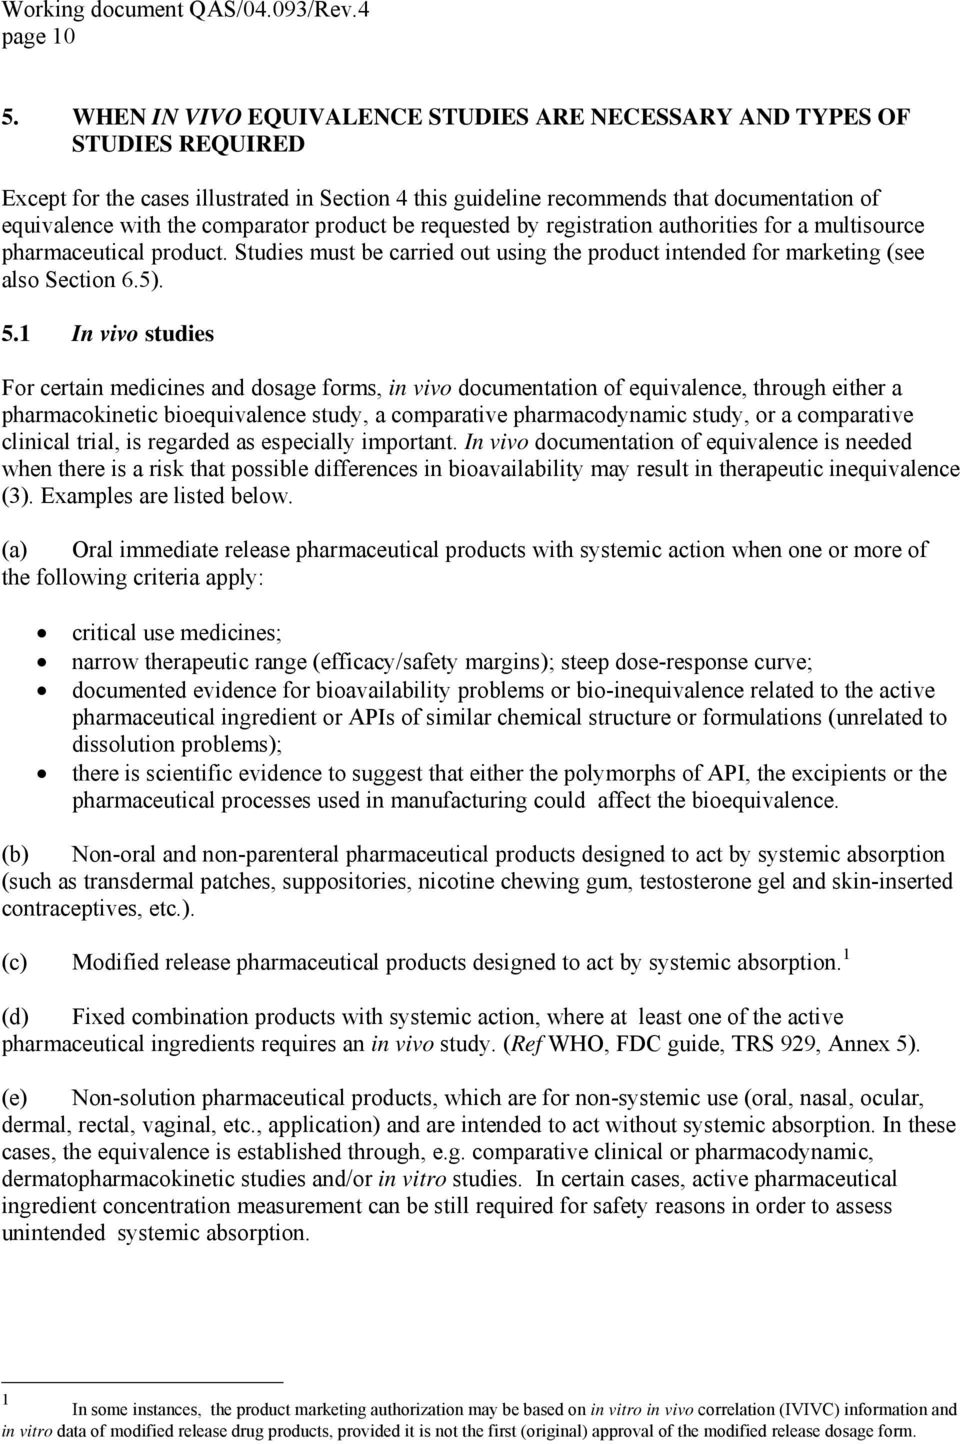 comparator product be requested by registration authorities for a multisource pharmaceutical product. Studies must be carried out using the product intended for marketing (see also Section 6.5). 5.